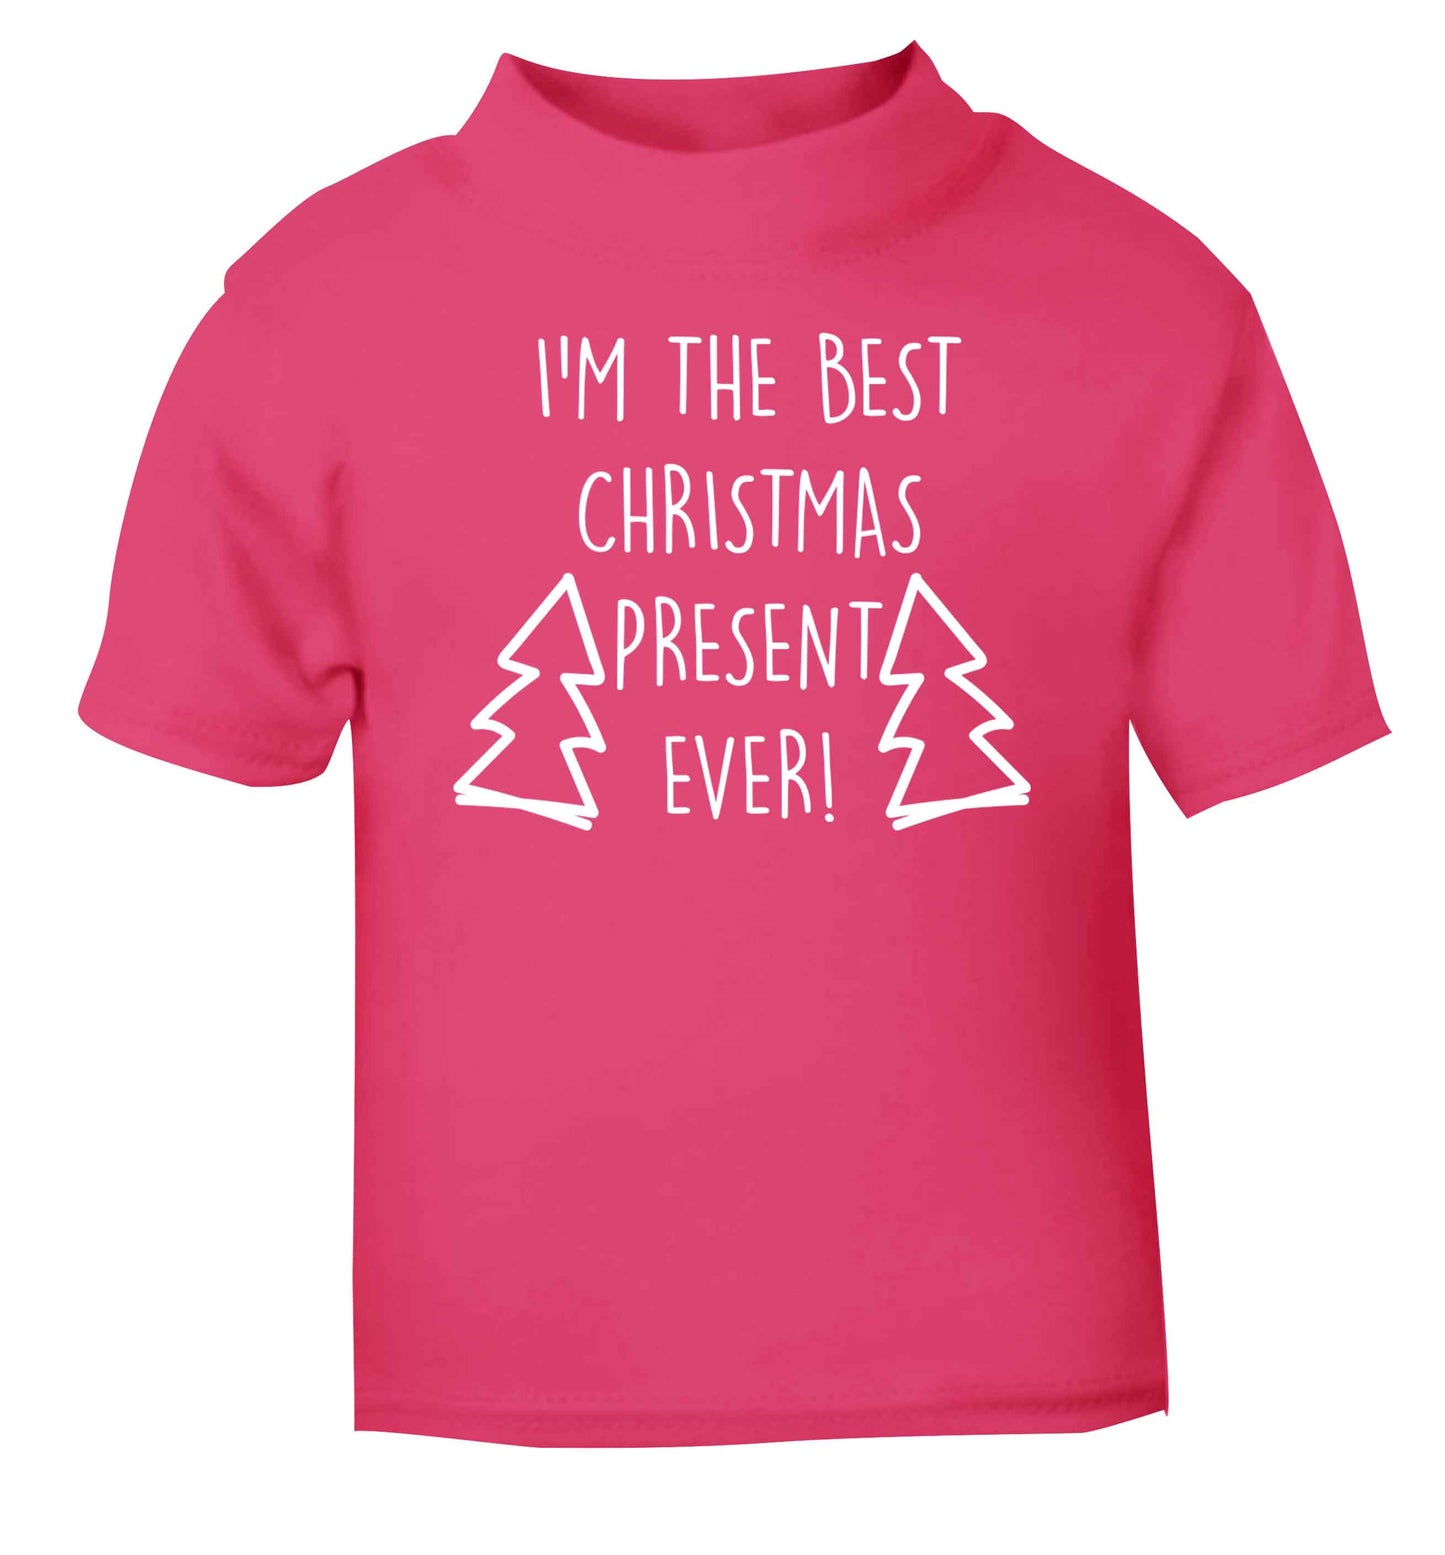 I'm the best Christmas present ever pink baby toddler Tshirt 2 Years